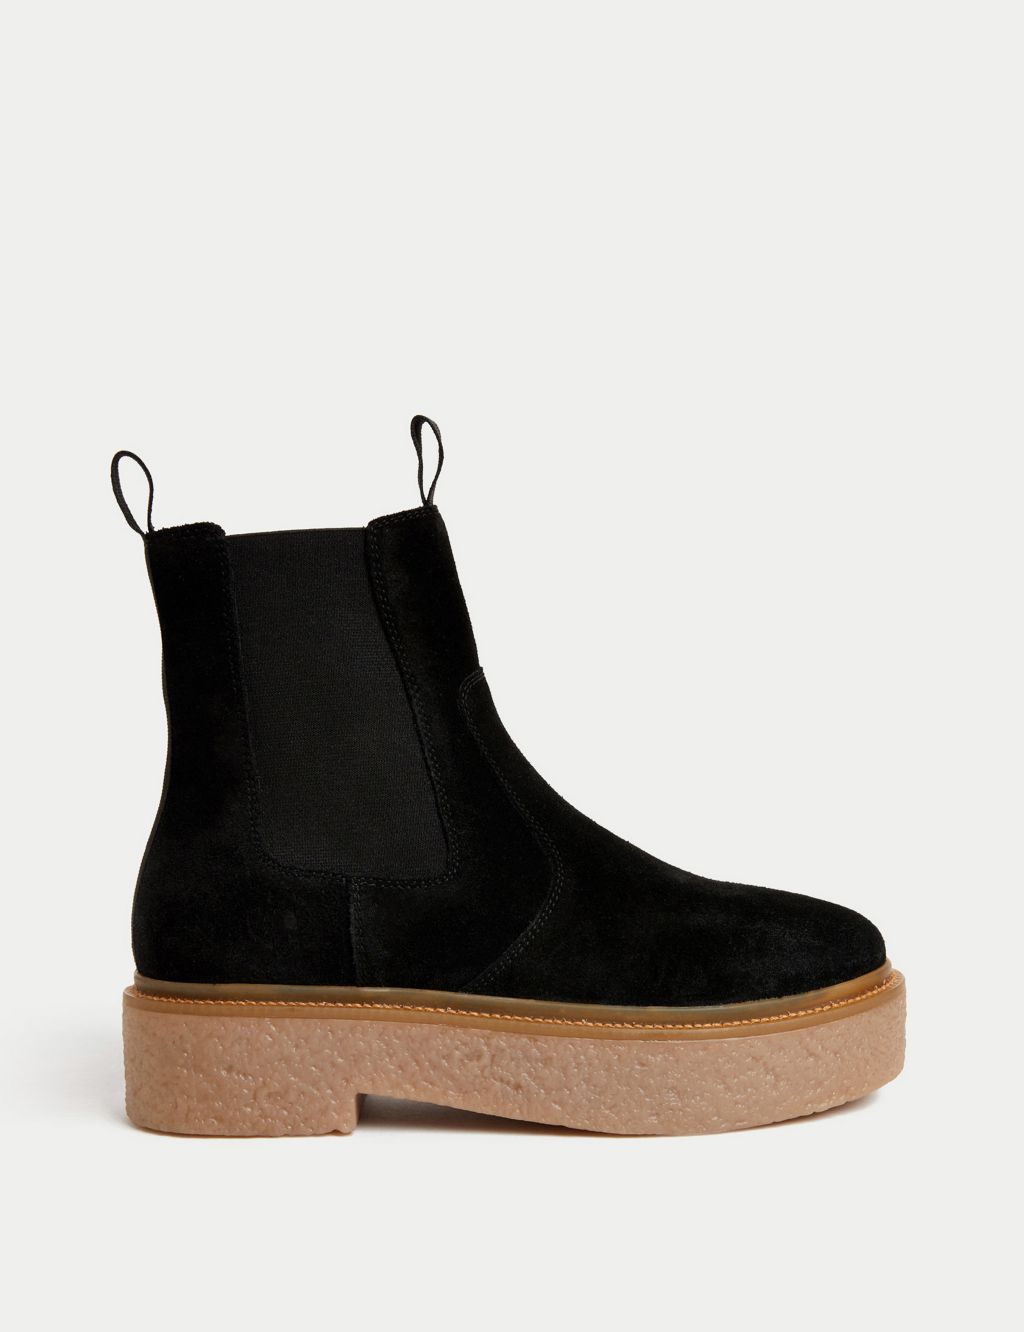 Suede Chelsea Chunky Flat Ankle Boots image 1